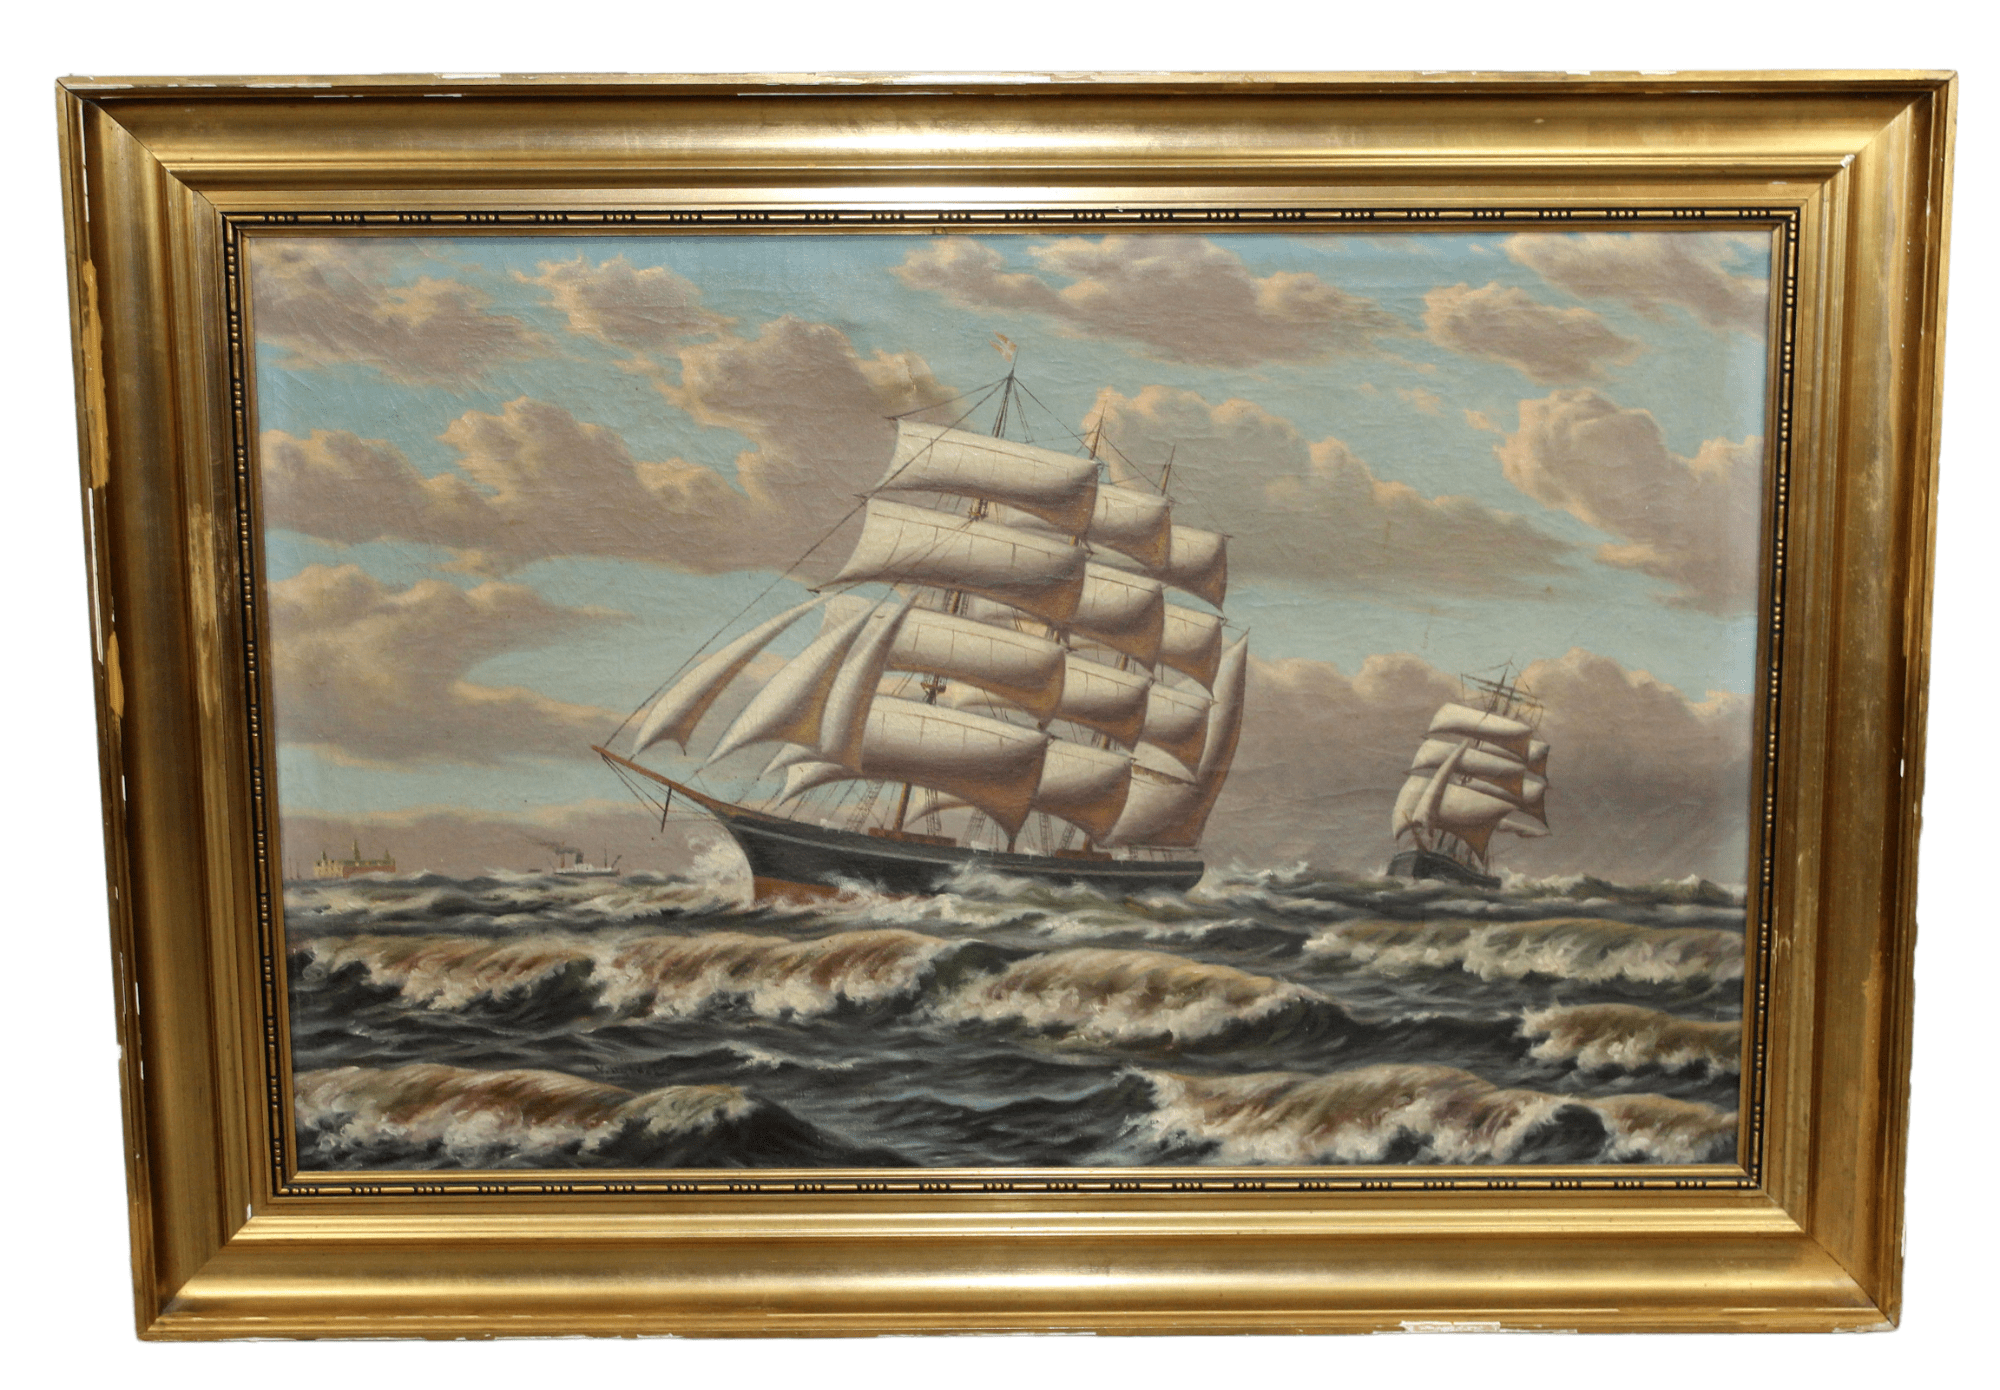 Oil on canvas seascape with sail boats